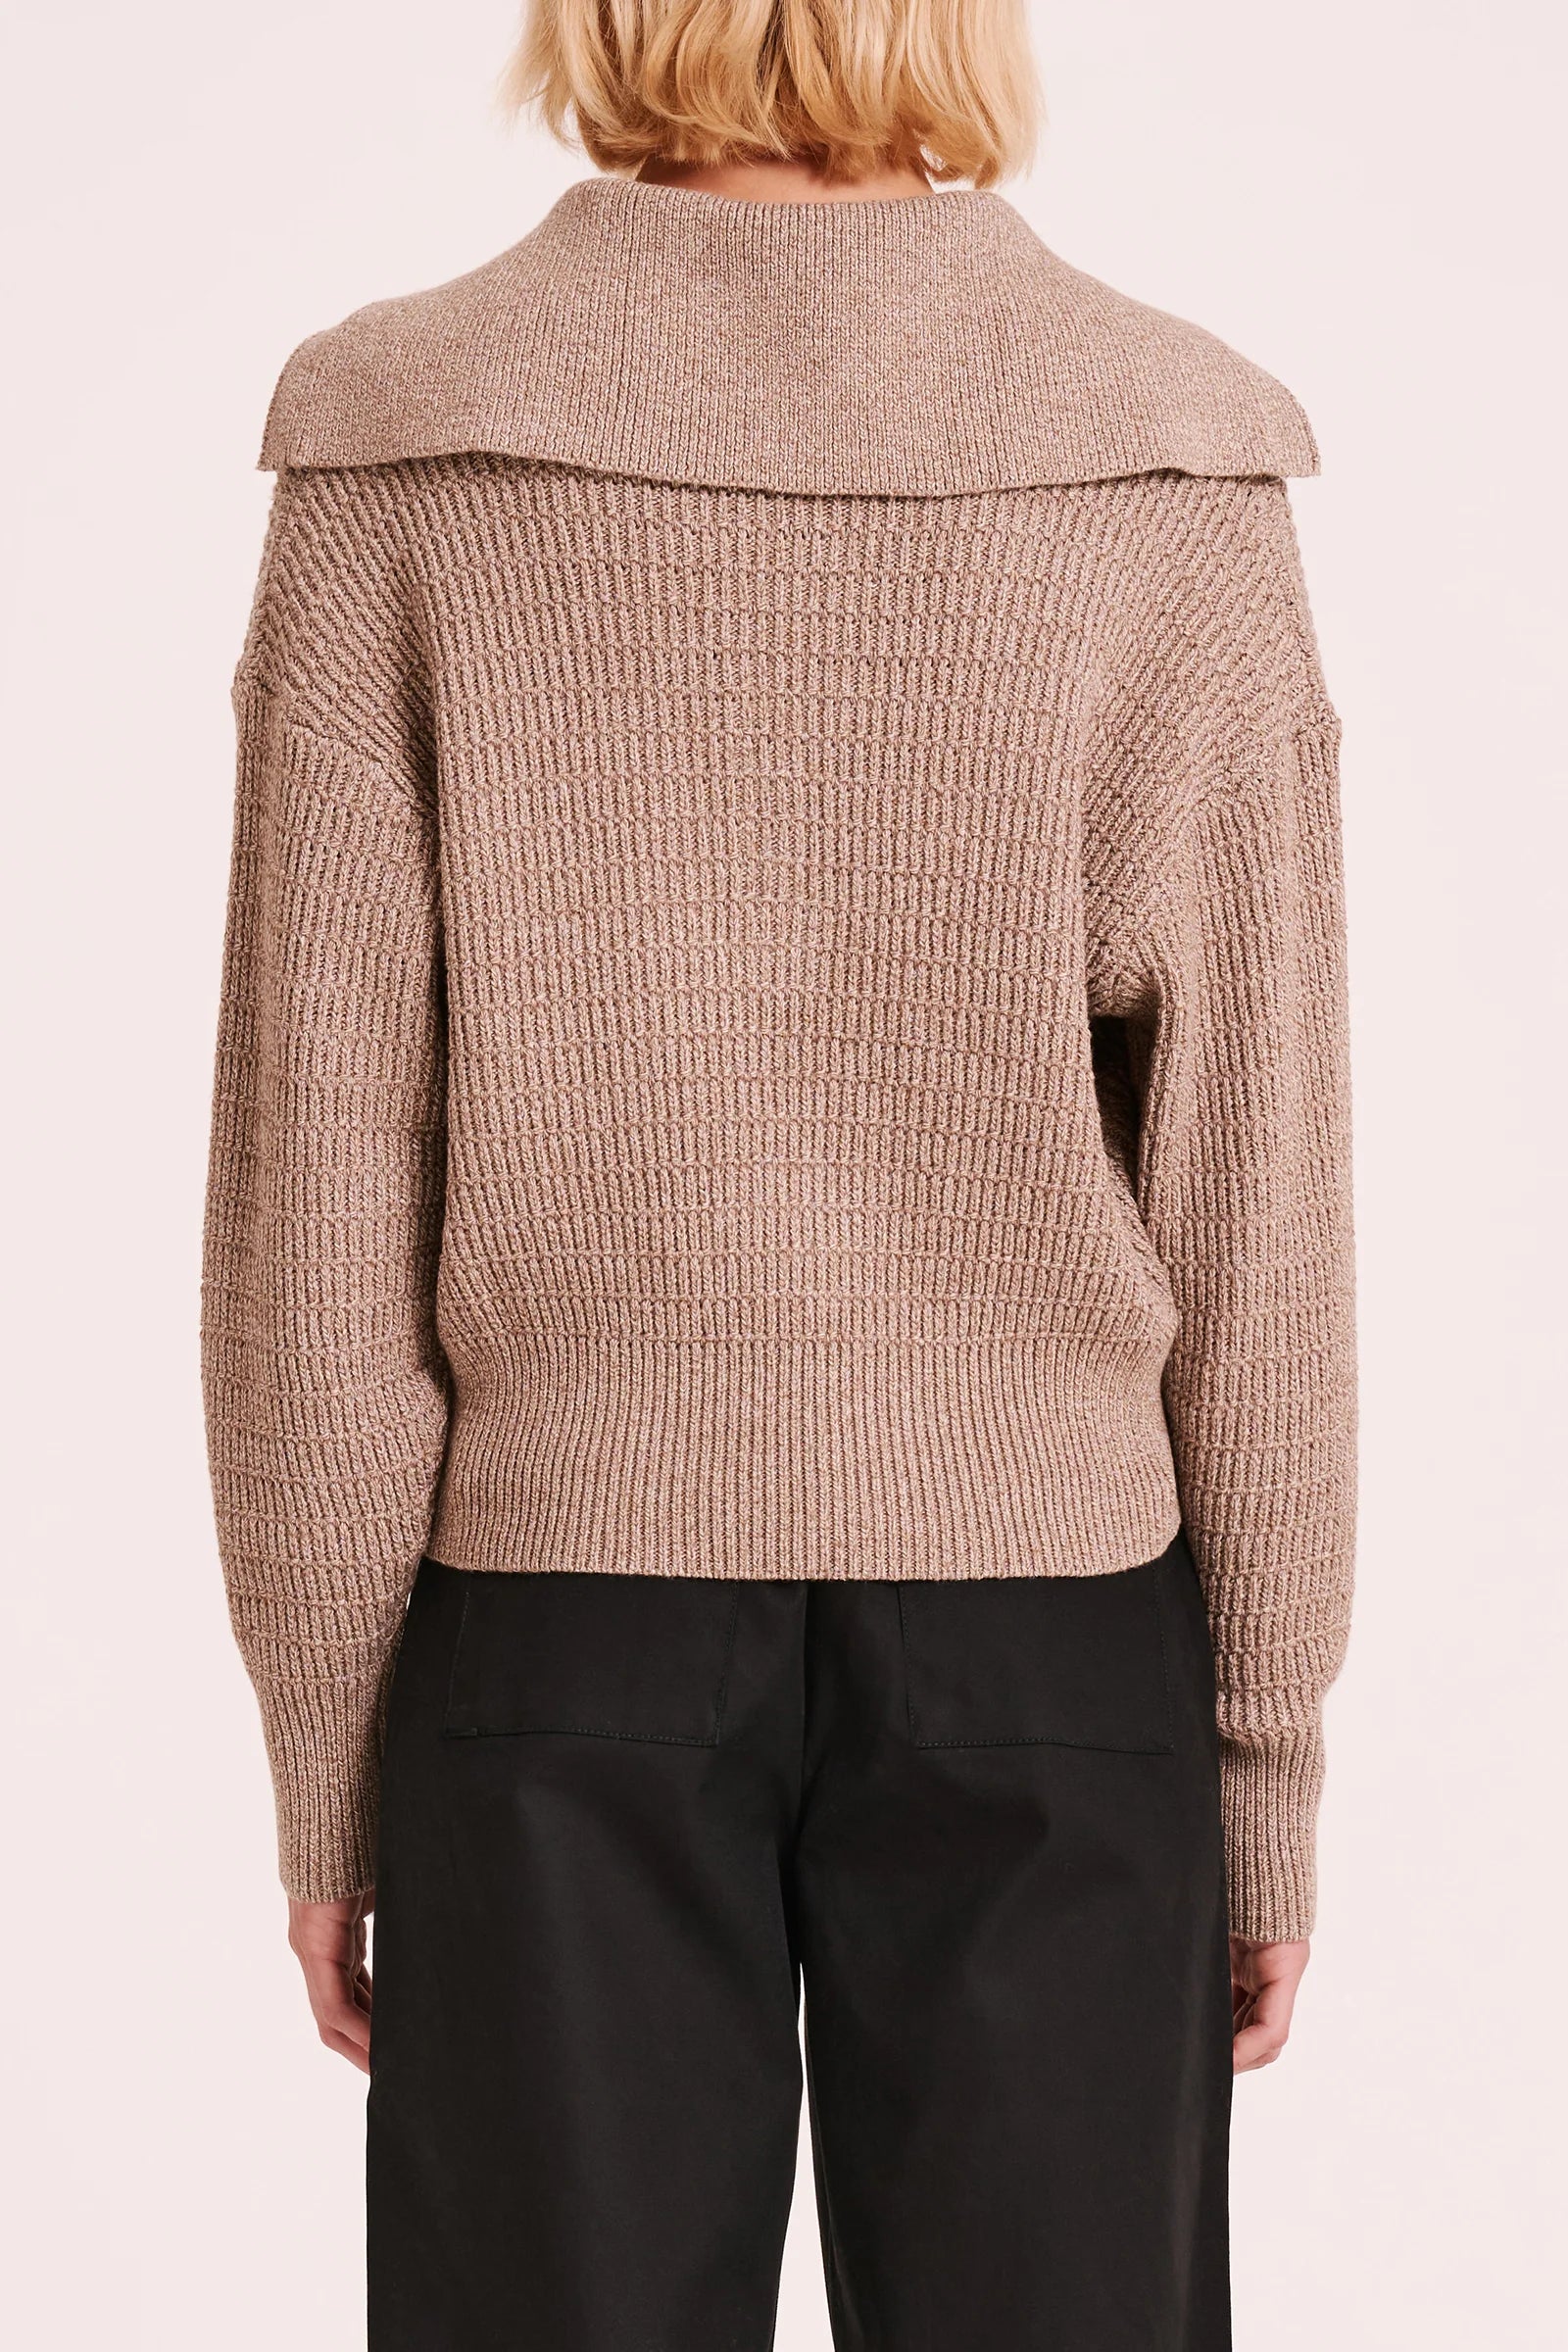 Nude Lucy | Nala Rugby Knit - Pebble